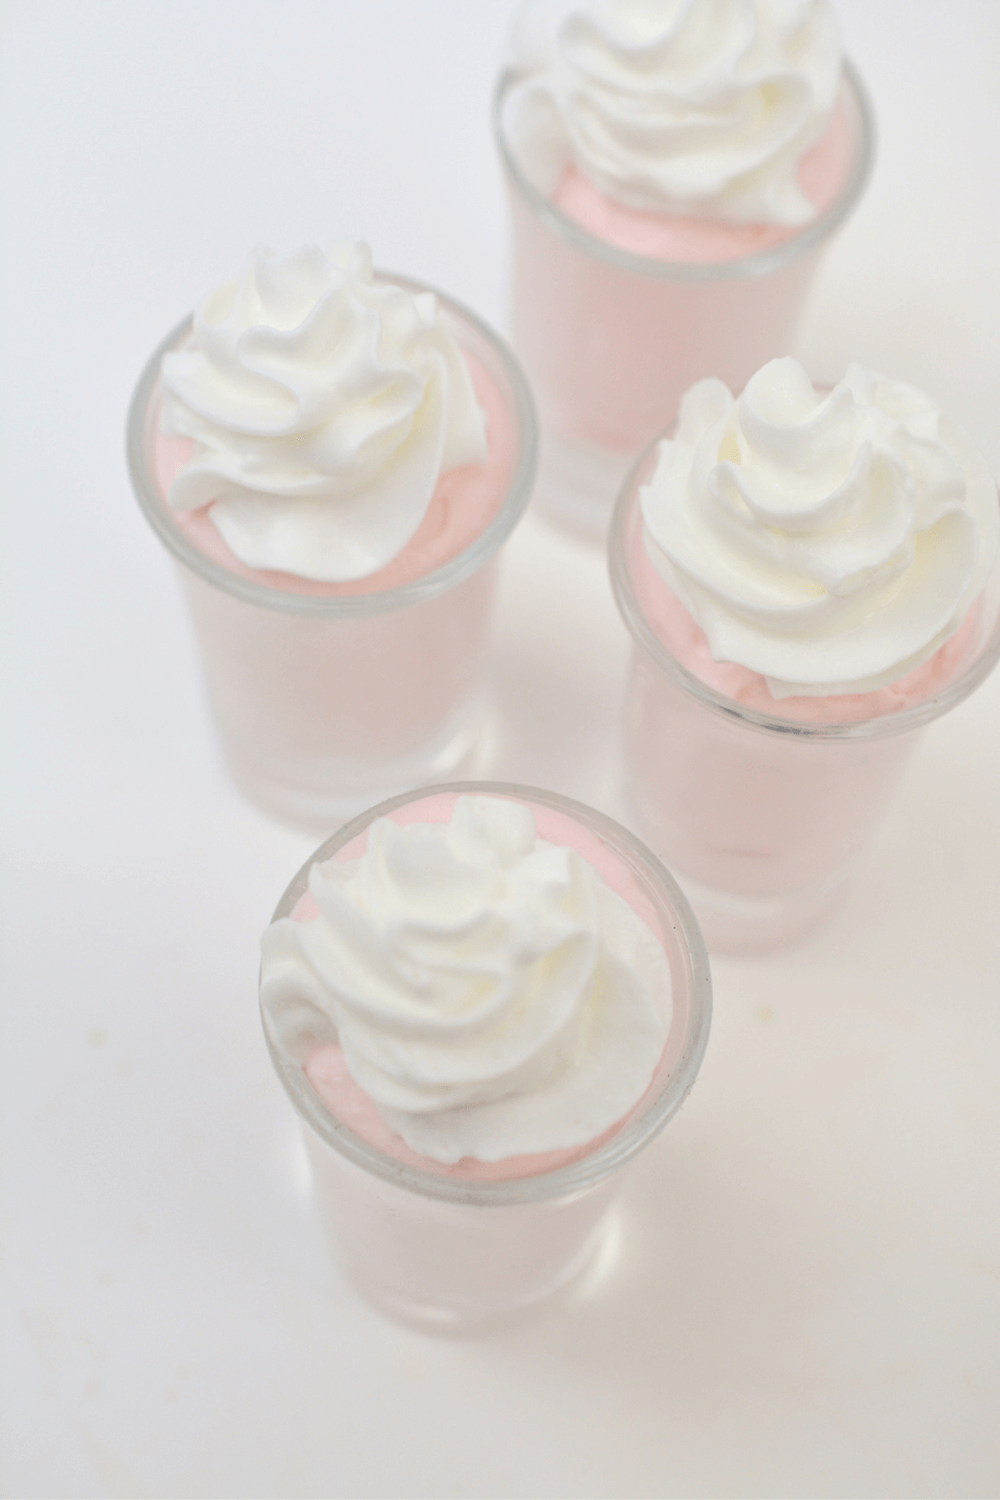 strawberry cheesecake with whipped cream in shot glasses